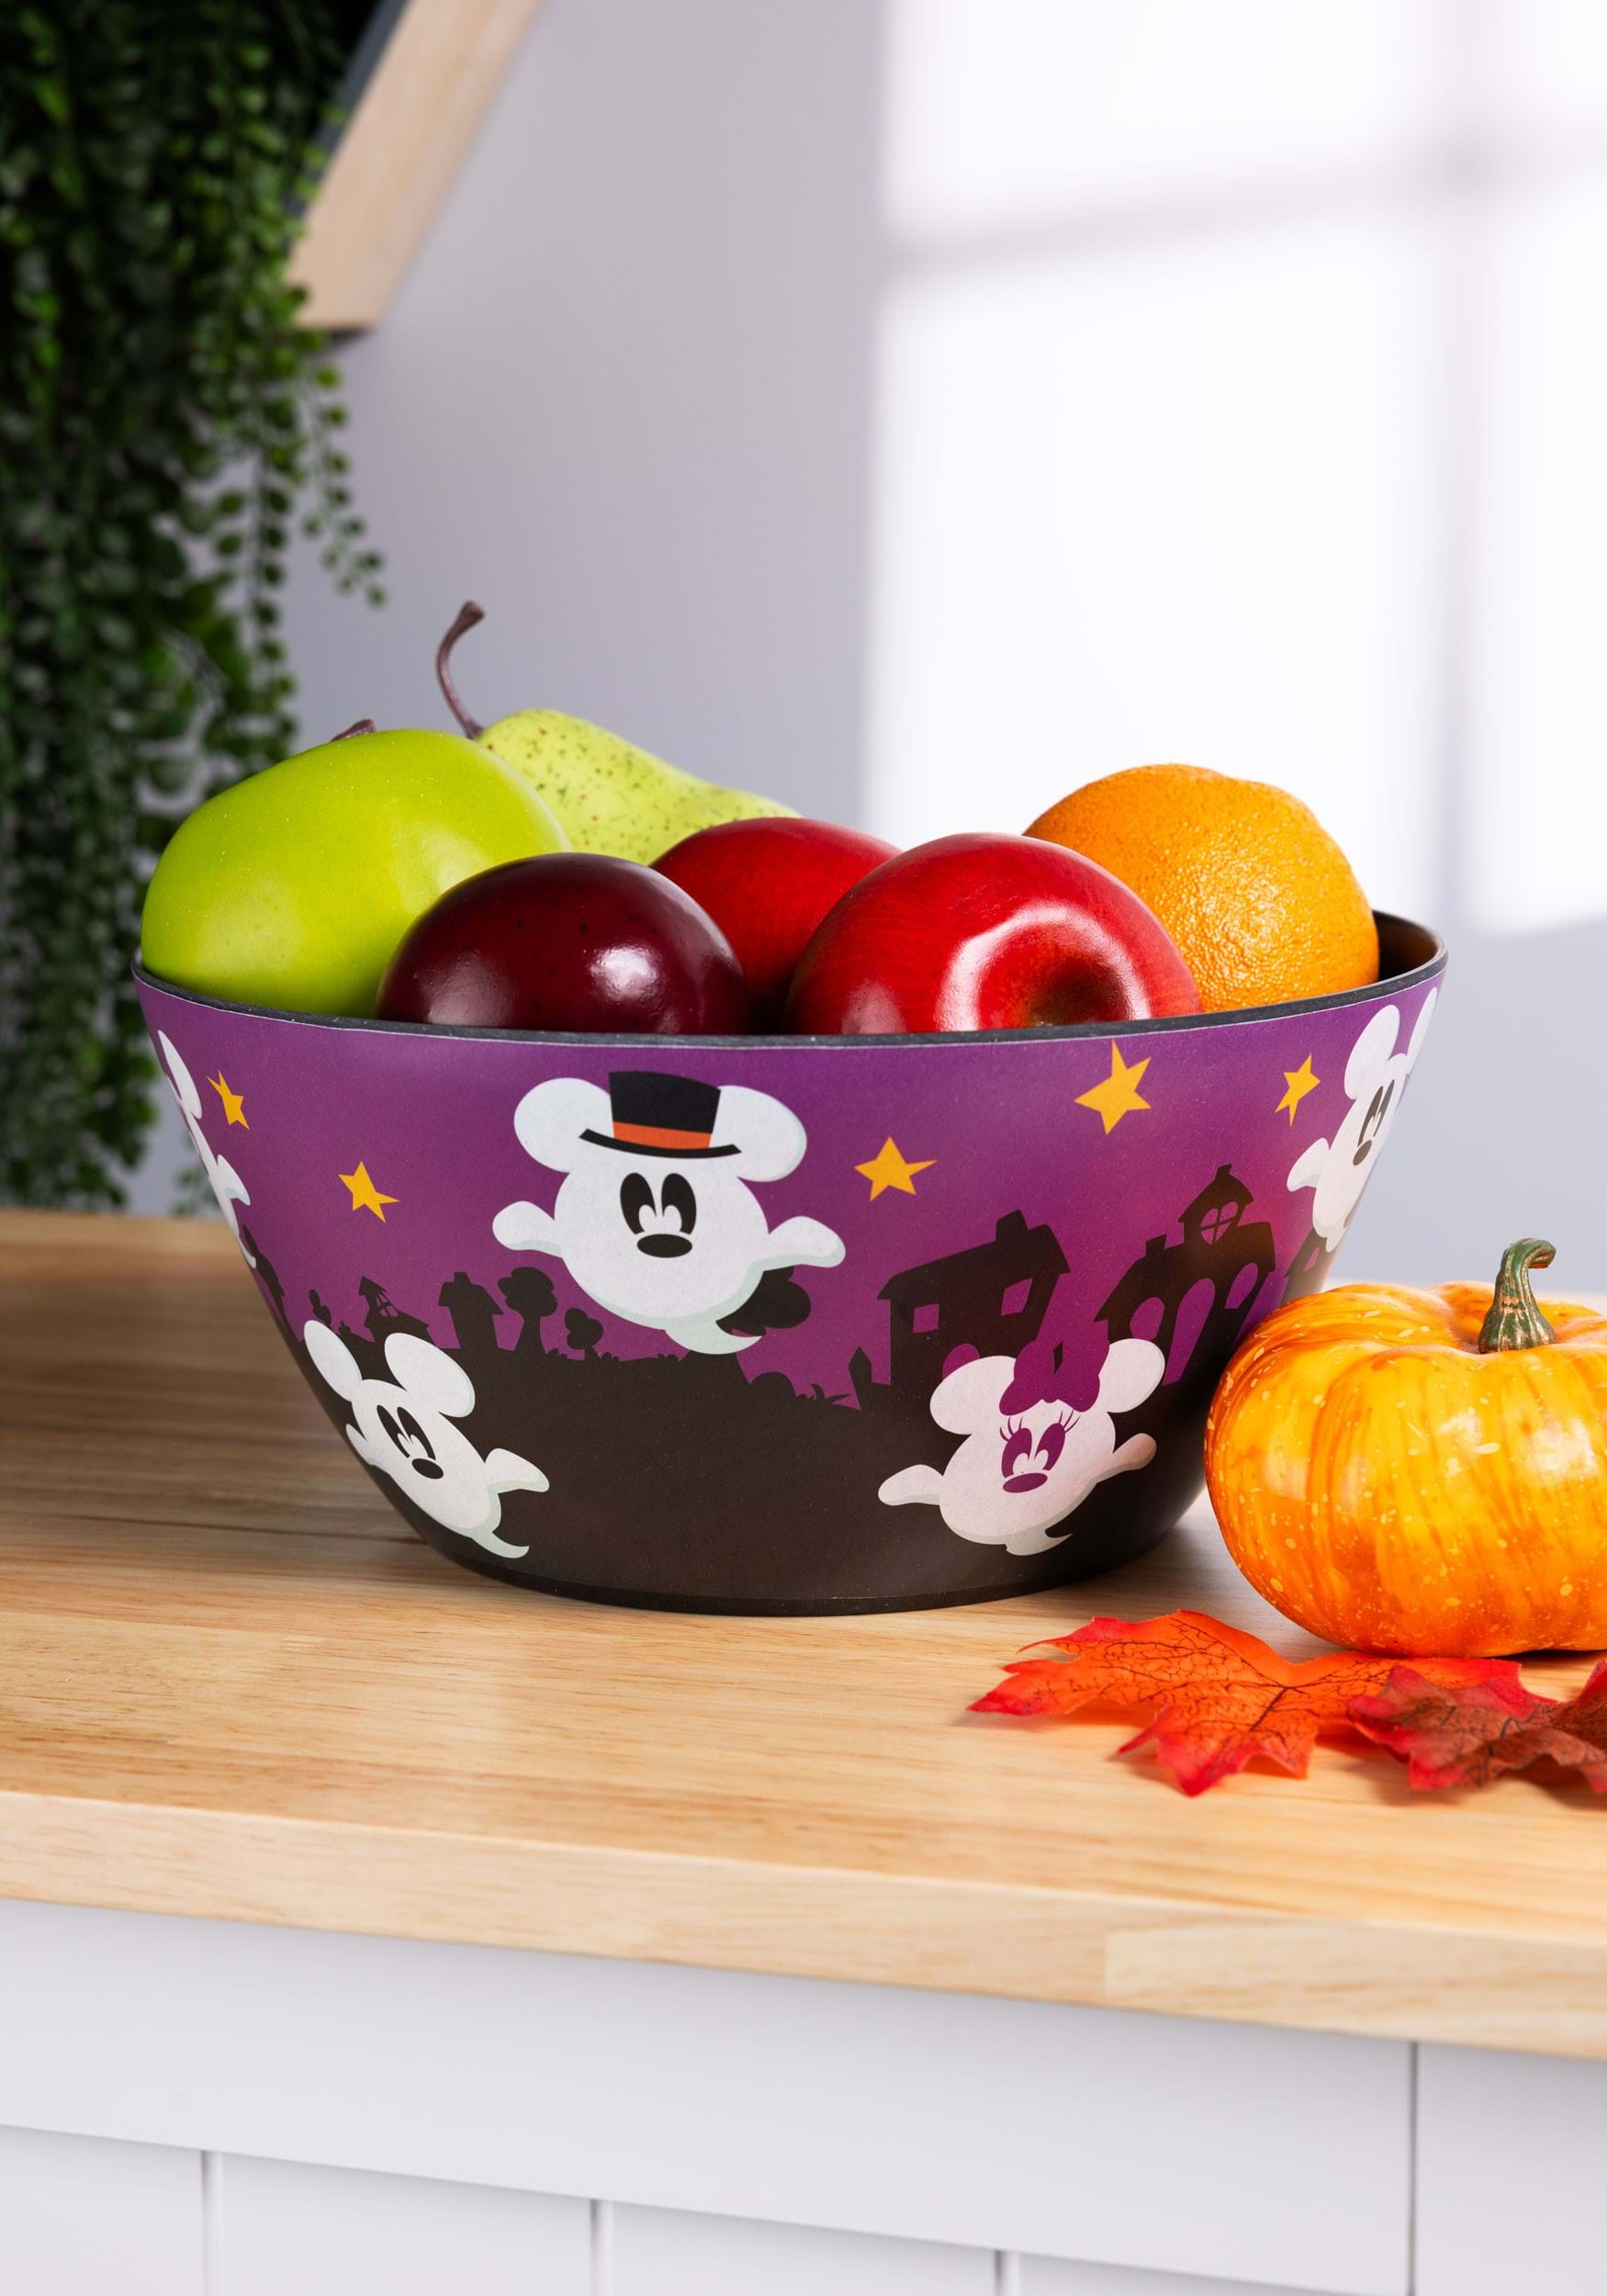 https://images.halloween.com/products/88721/2-1-295654/dis-mickey-tossed-ghost-black-bamboo-salad-bowl-alt-1.jpg